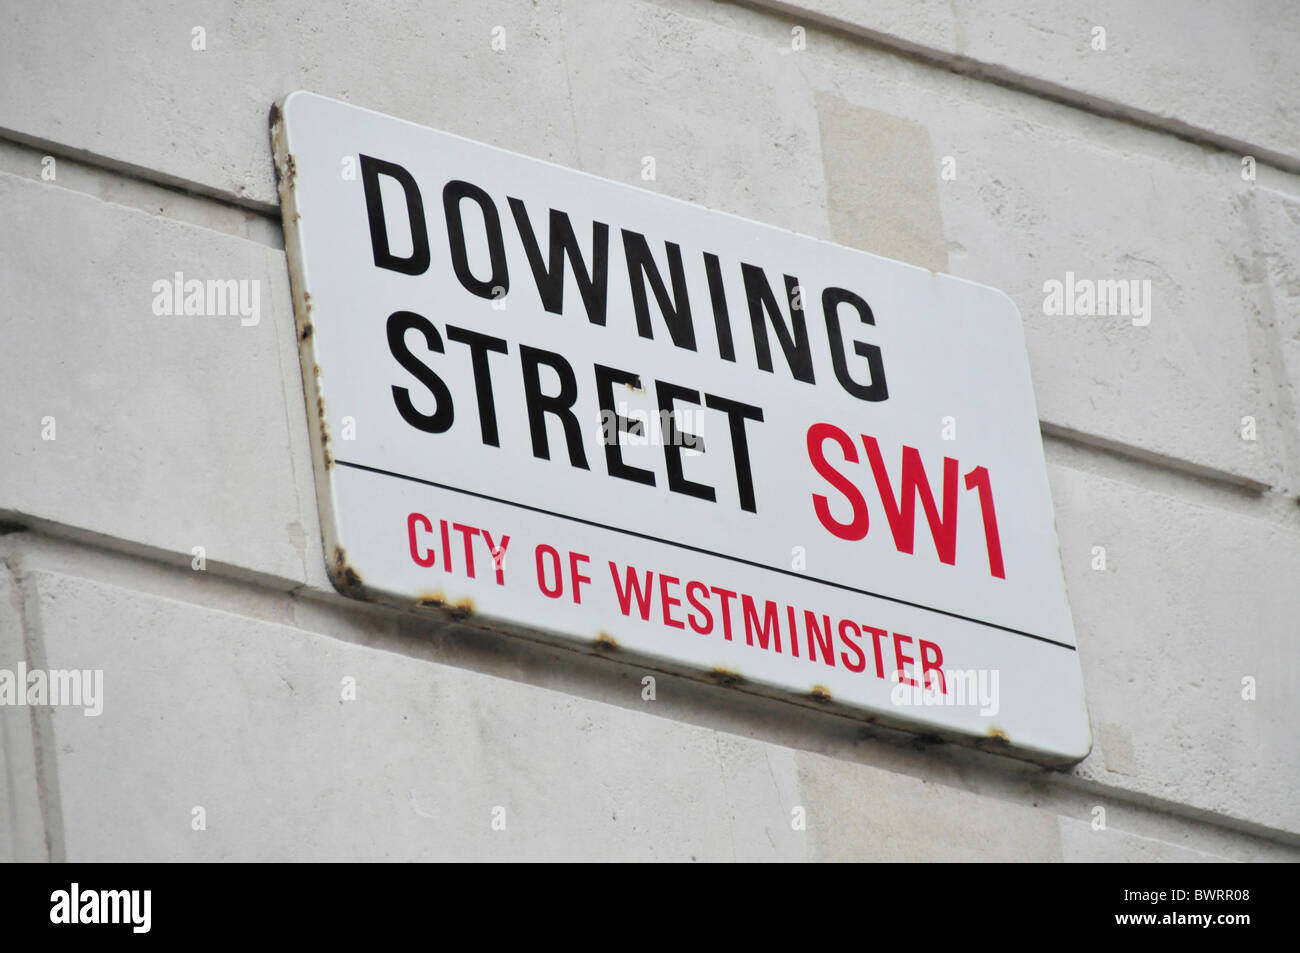 Street sign, Downing Street, home of the British Prime Minister, London, England, United Kingdom, Europe Stock Photo